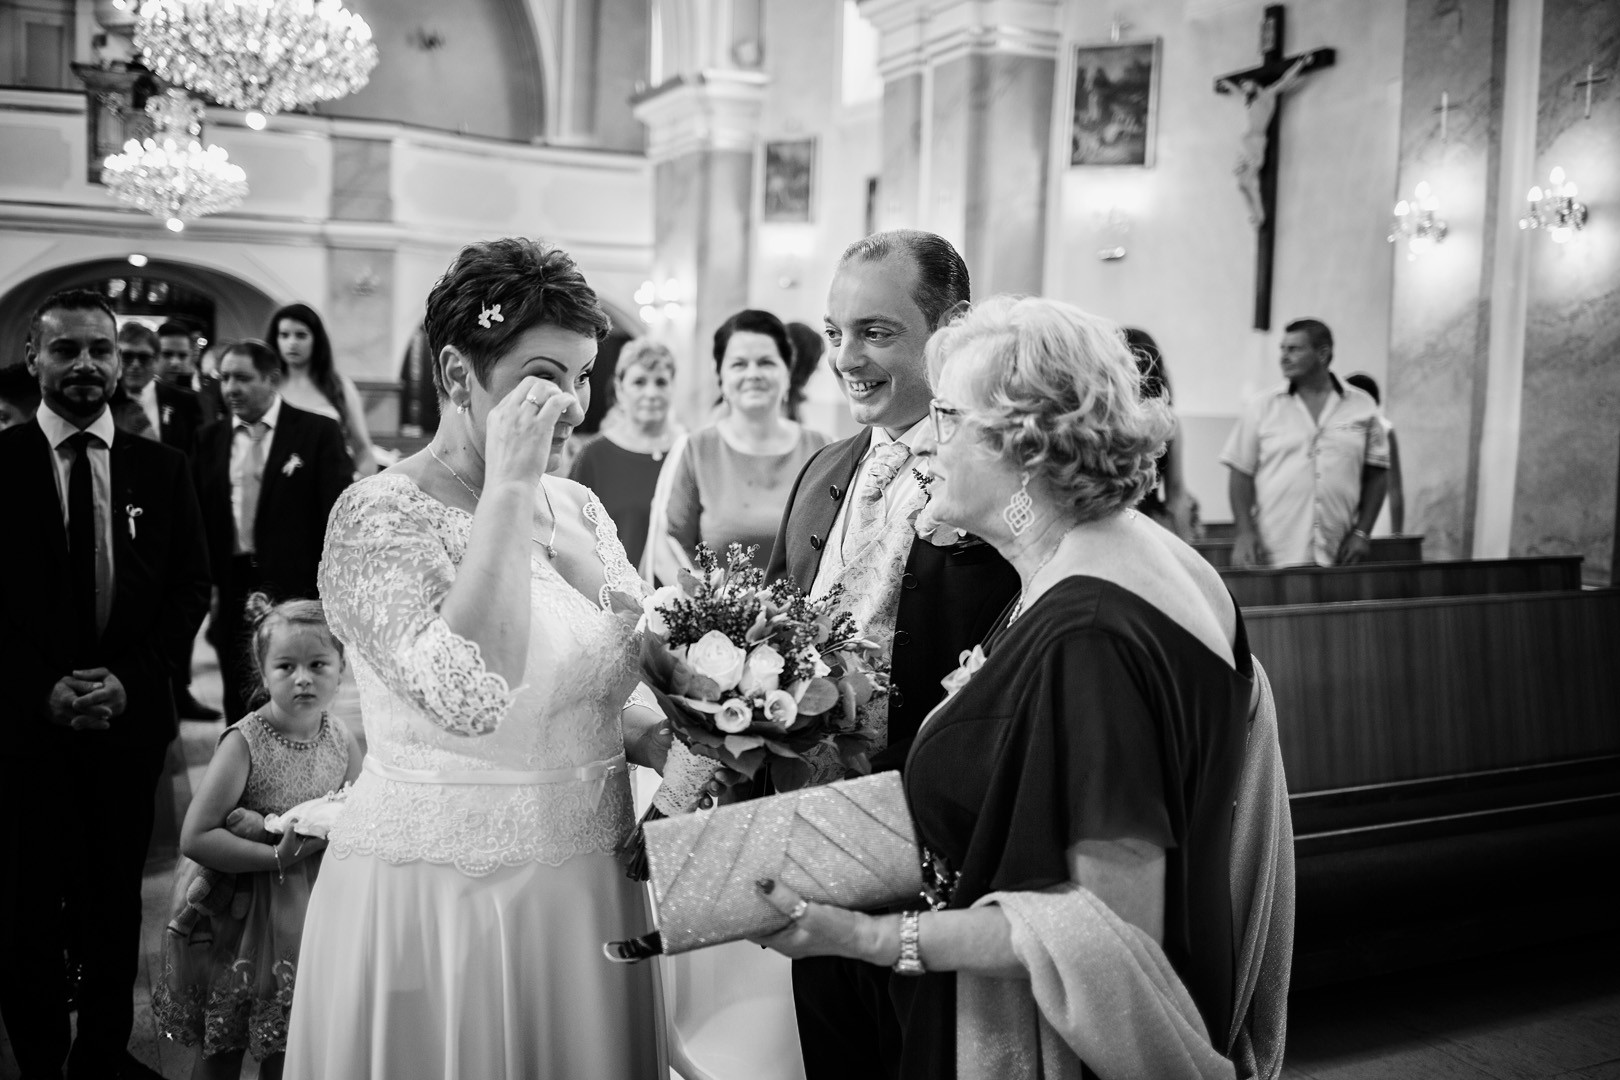 Wedding photos from the Slovak-Italian wedding of Mirka and Baldy in the beautiful surroundings of the Gbeľany Manor House - 0022.jpg